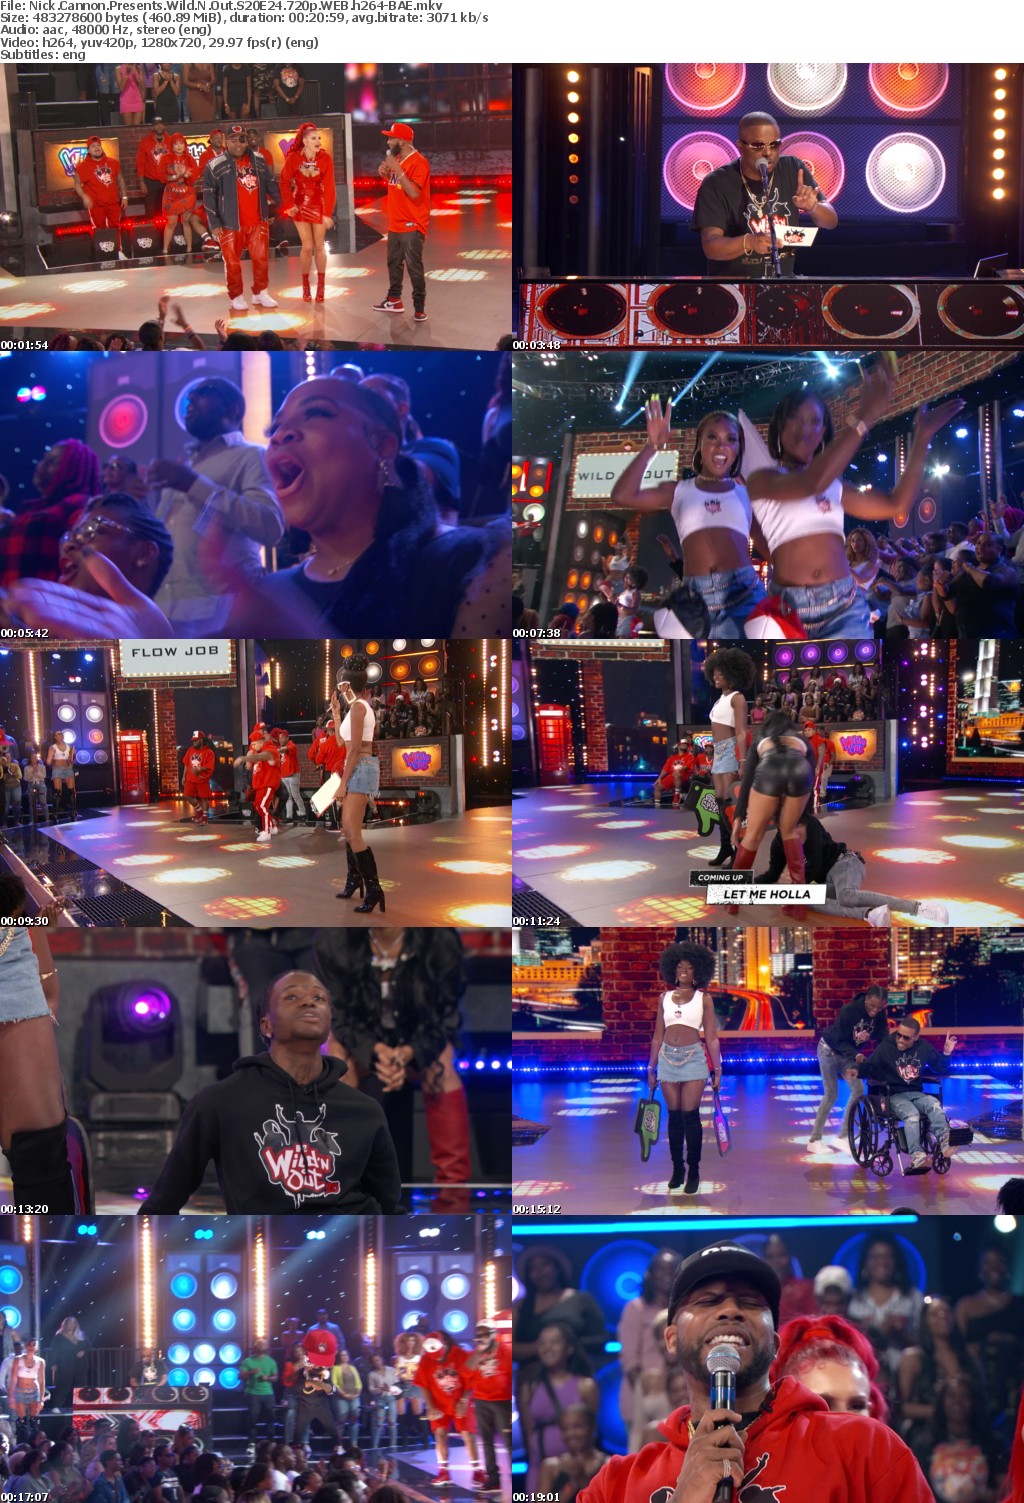 Nick Cannon Presents Wild N Out S20E24 720p WEB h264-BAE